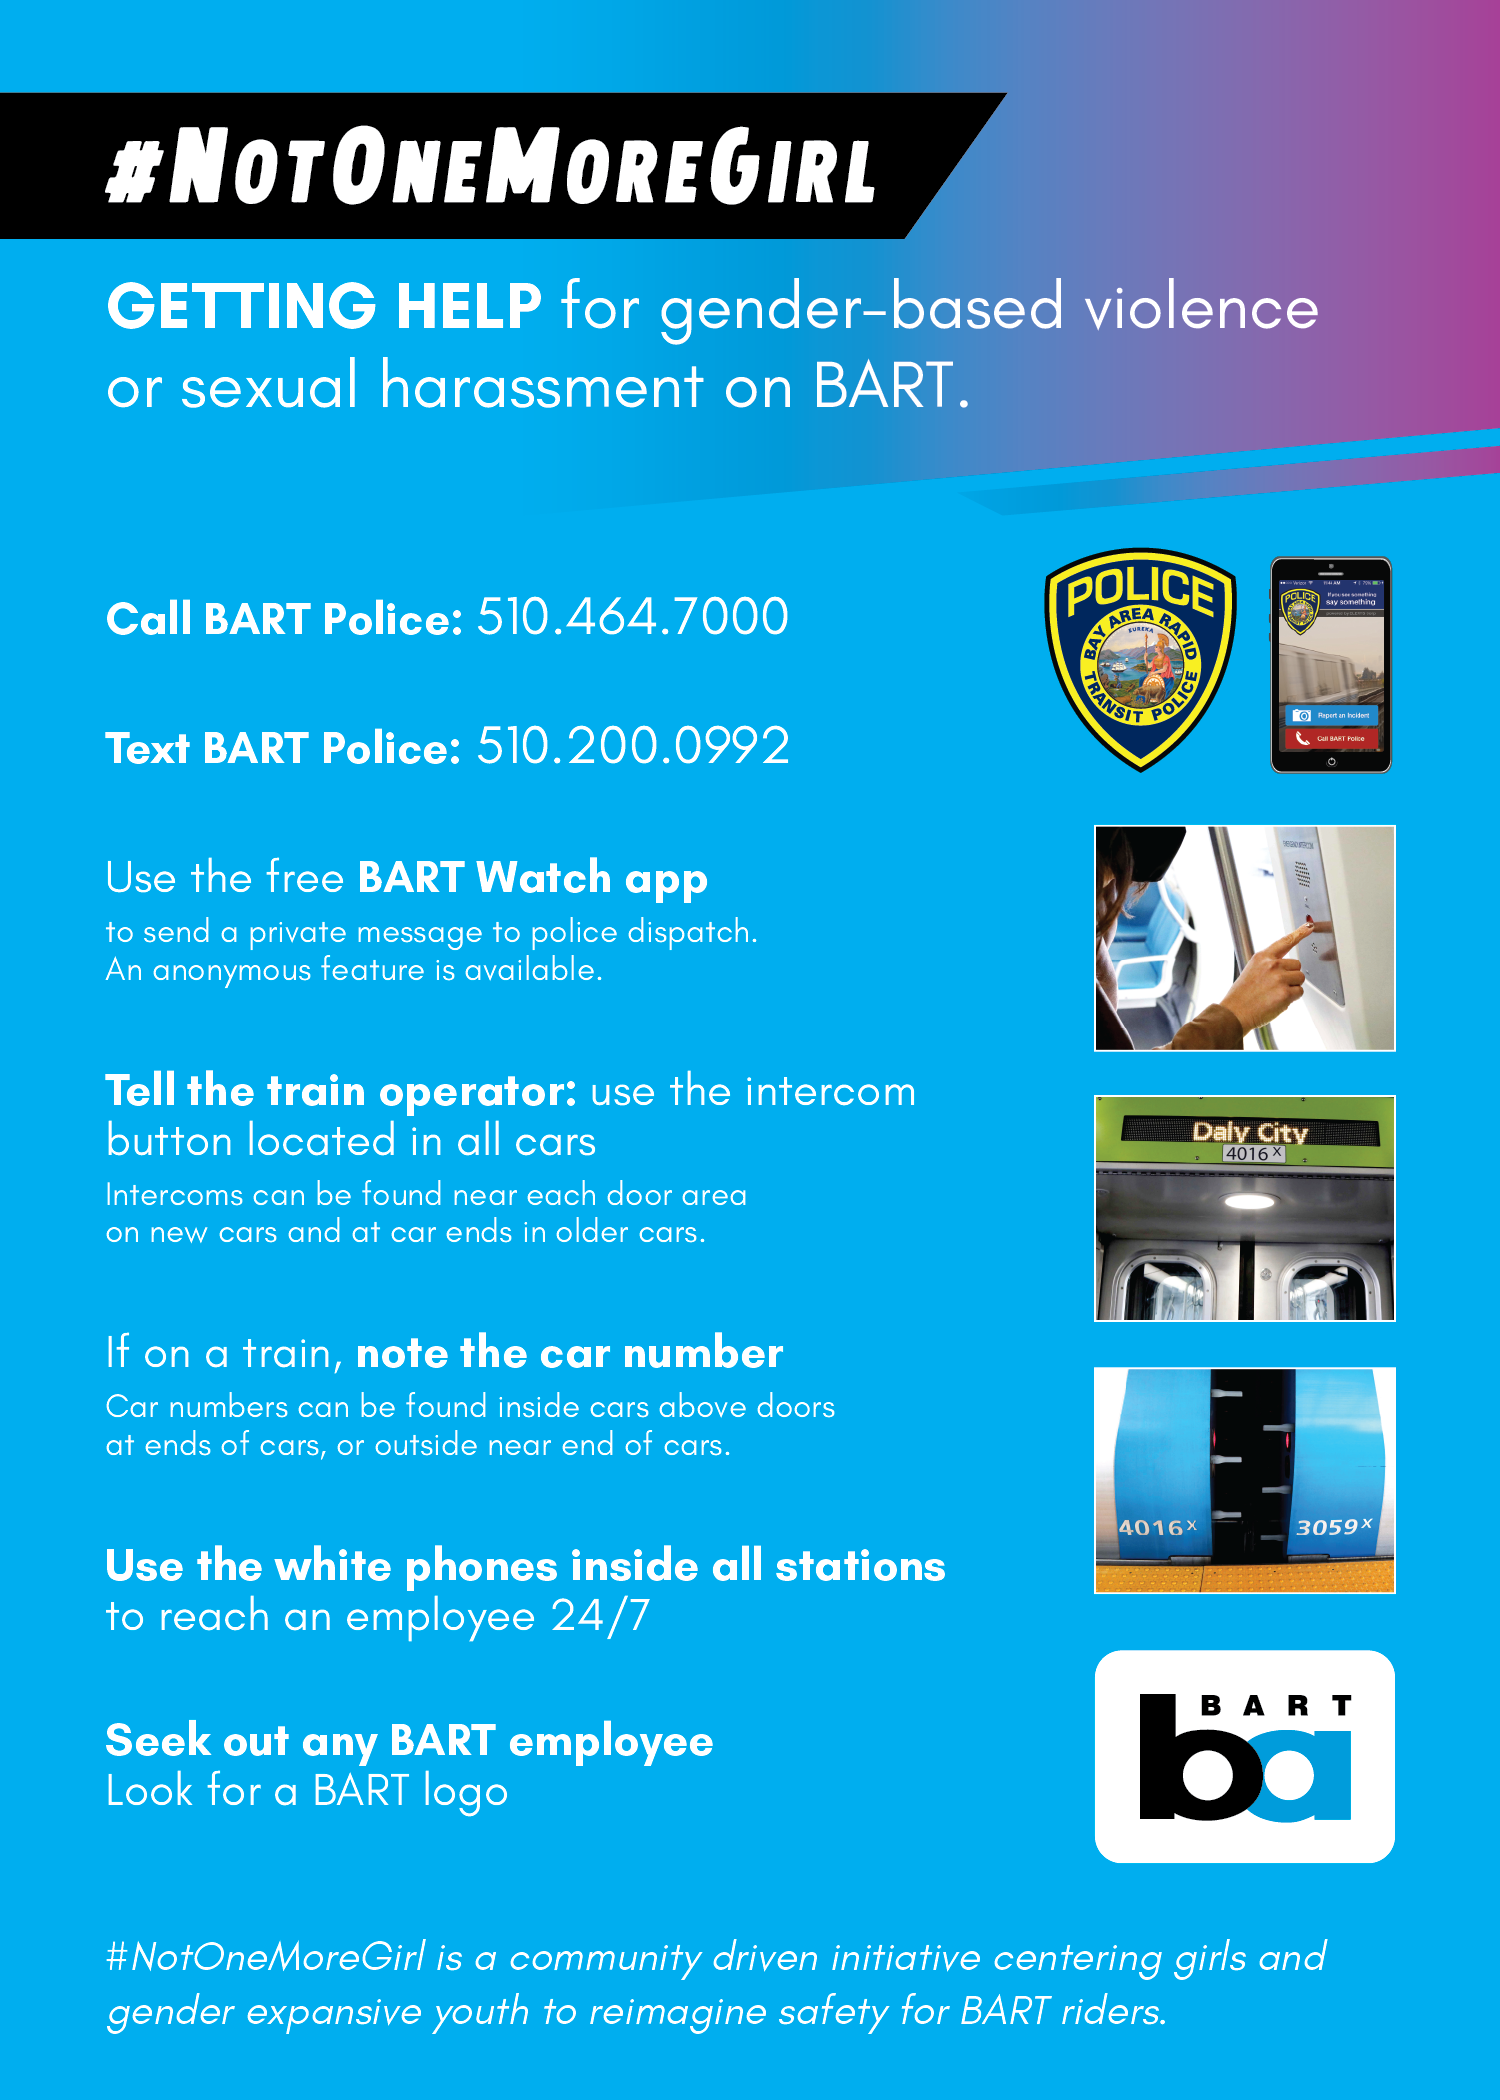 Accessible PDF of "Getting help for gender-based violence or sexual harassment on BART" is included on this webpage